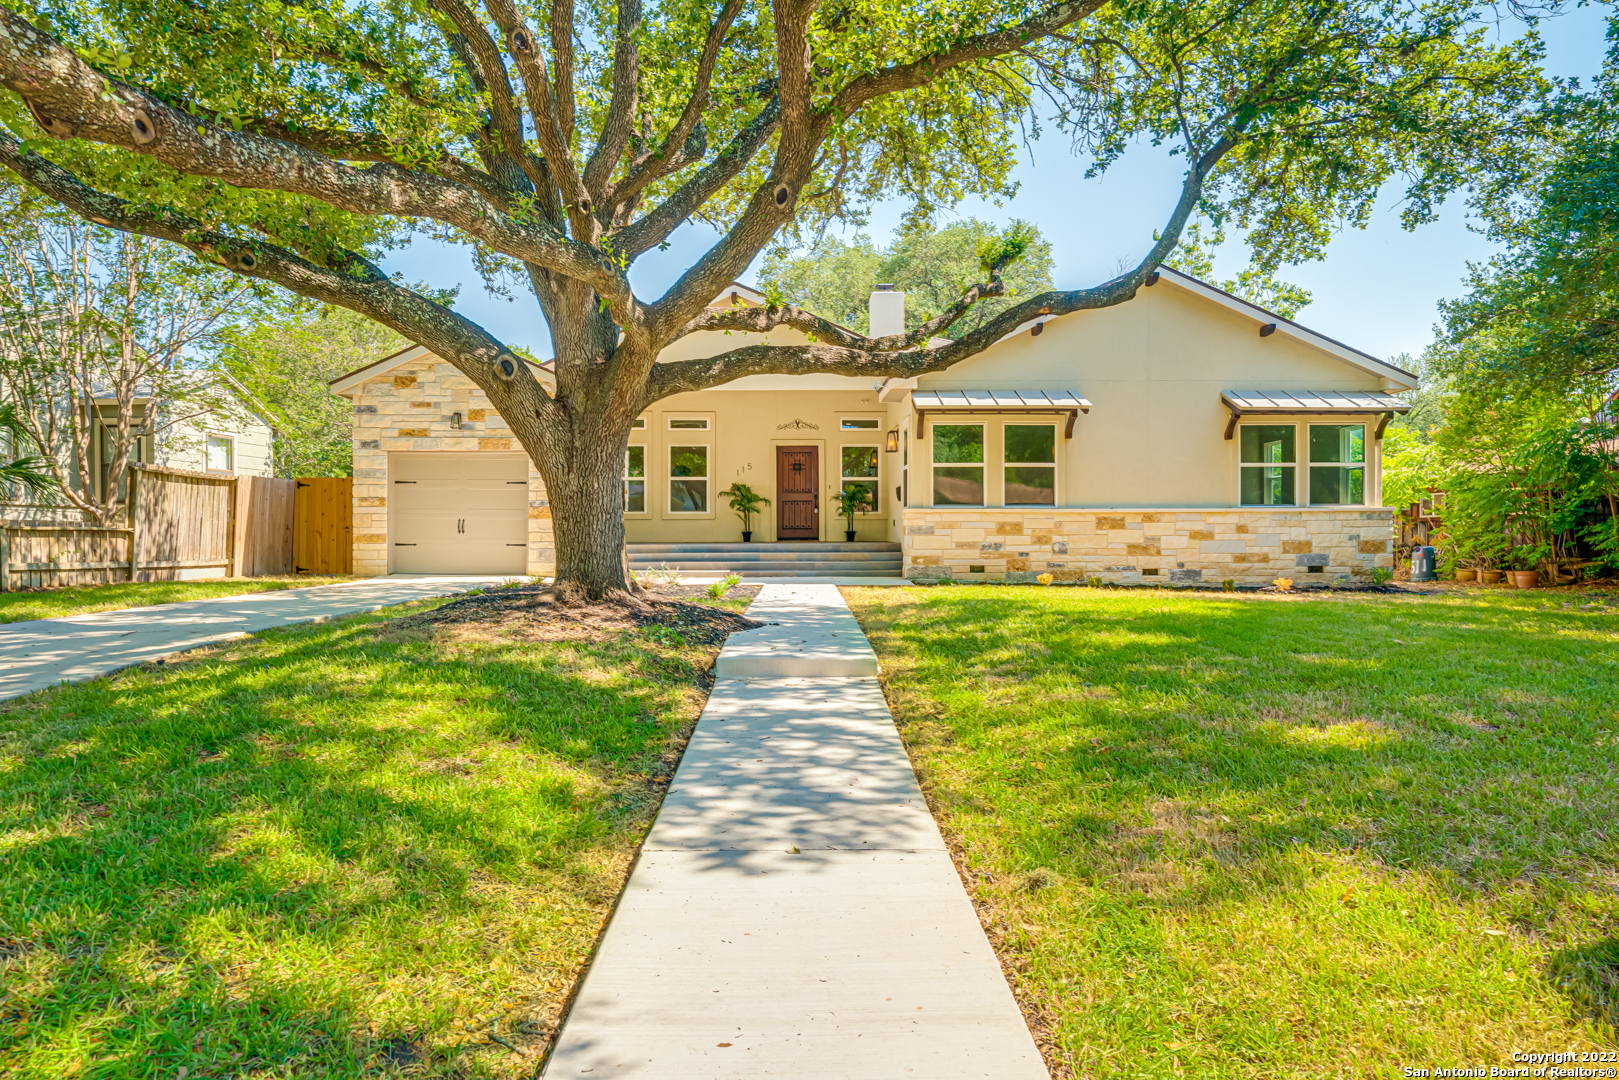 ** Open House Saturday (07/02) from 12PM to 3 PM ** Lovely 4 bedroom, 3 bathroom home in Alamo Heights ISD! This home has been completely renovated from the ground up, with new wiring, plumbing, custom cabinets, bathrooms, nothing in this home was left untouched. Don't miss this opportunity to live in one of San Antonio's most desirable neighborhoods!